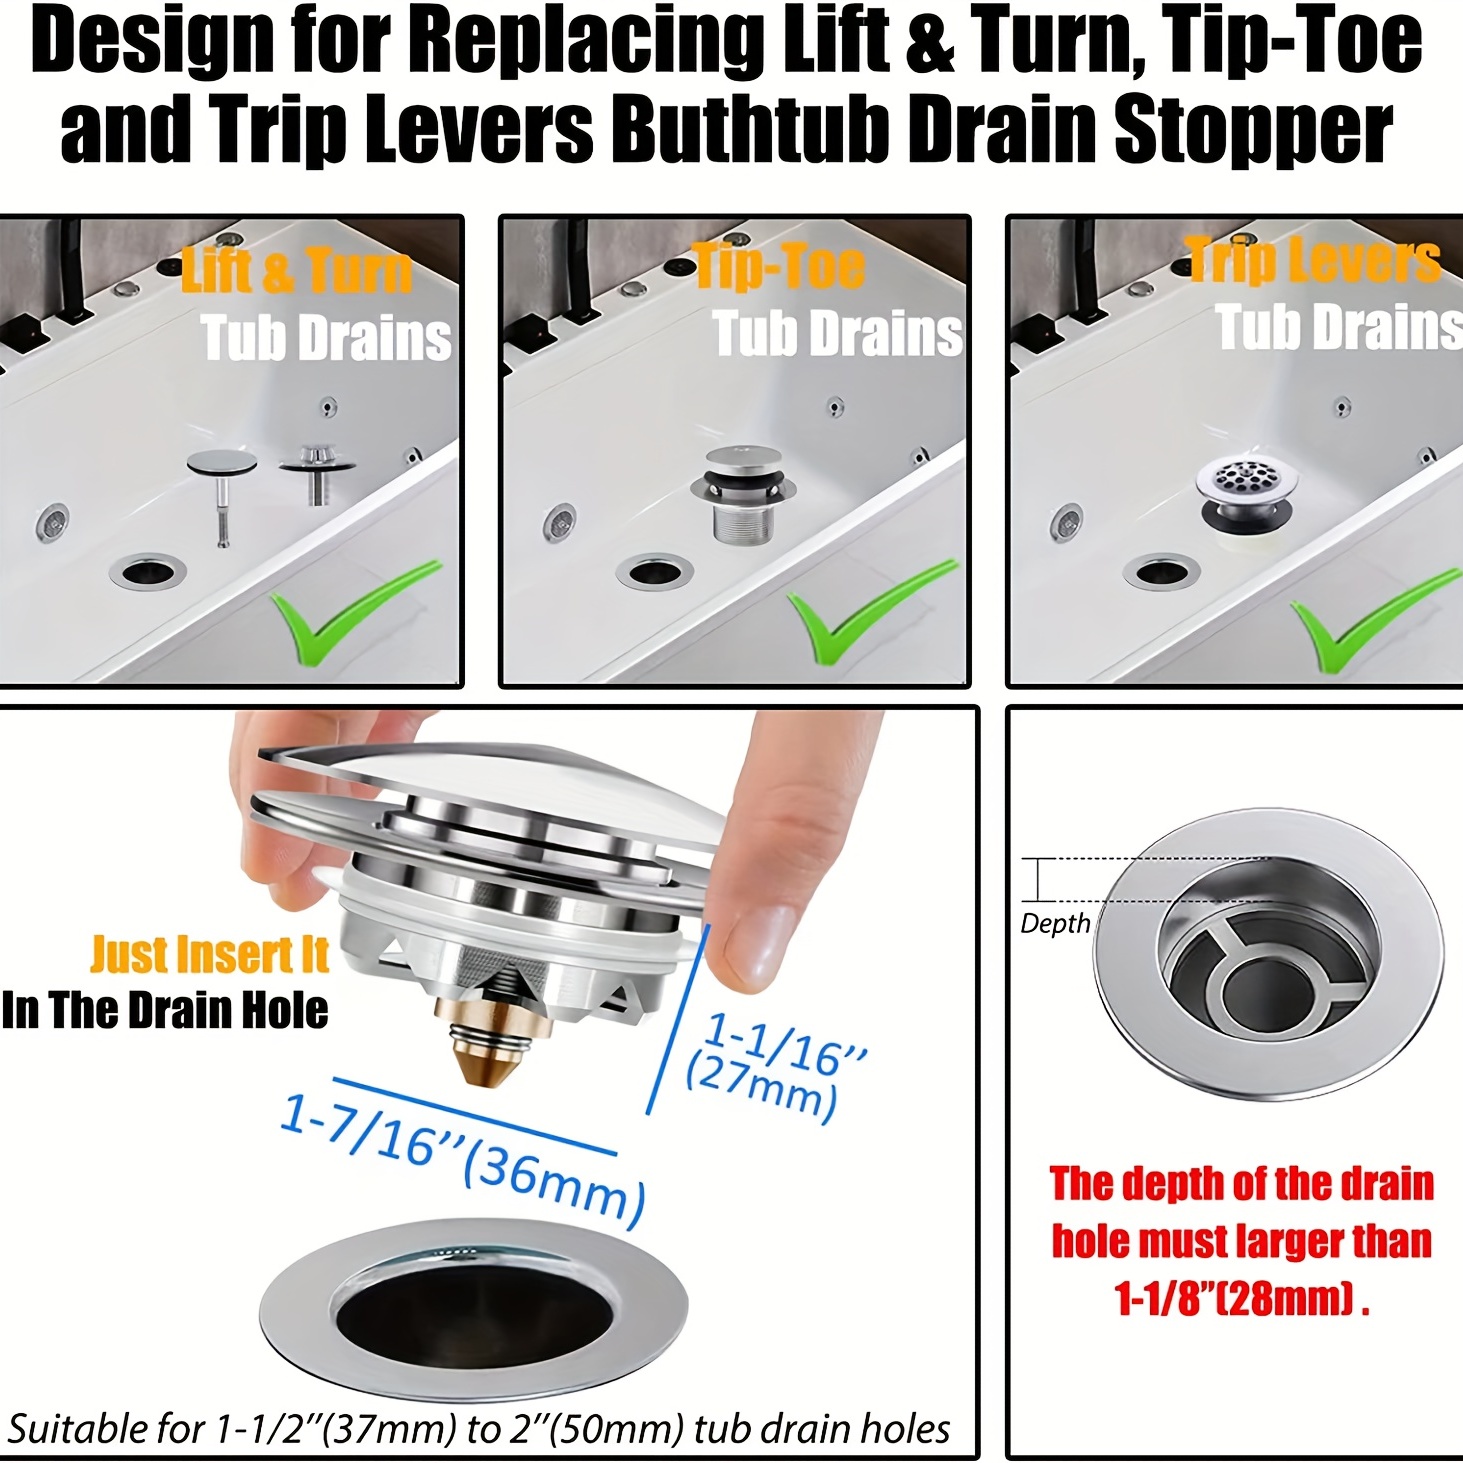 How to Replace Bathtub Drain Stopper With a Lift-and-Turn Drain (DIY)